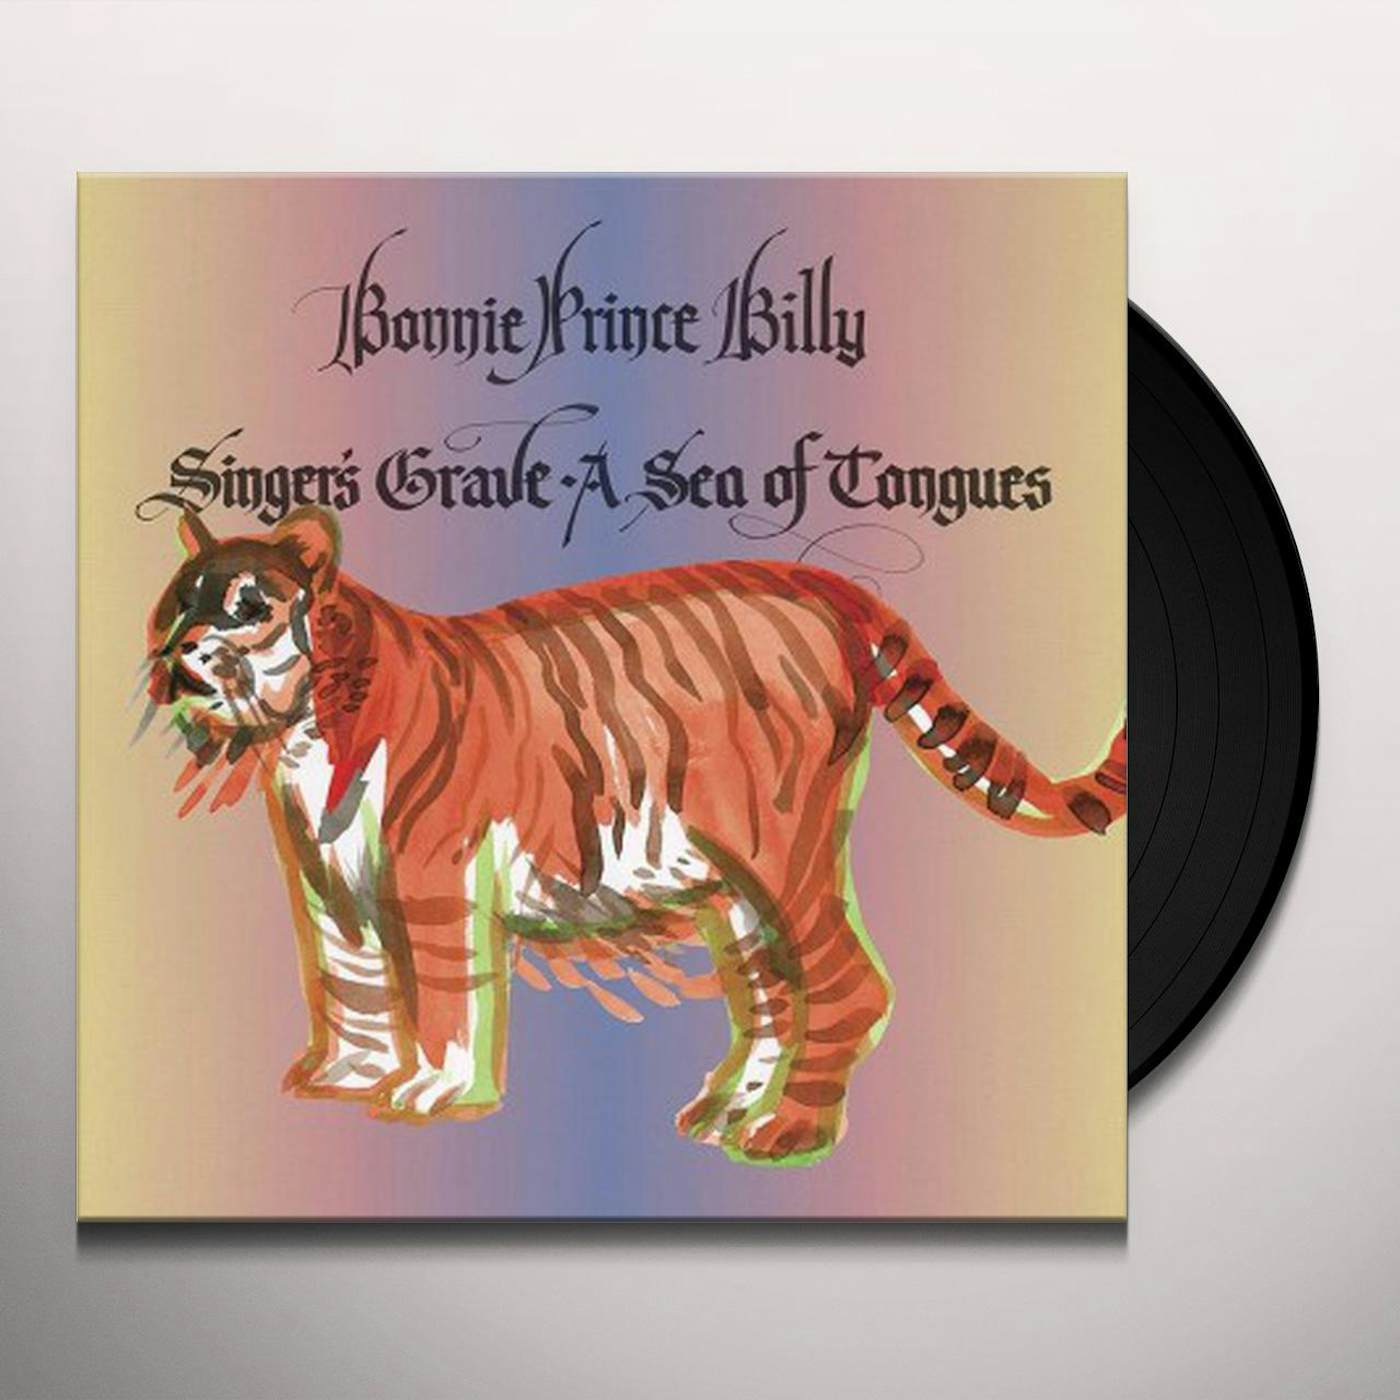 Bonnie Prince Billy Singer's Grave a Sea of Tongues Vinyl Record